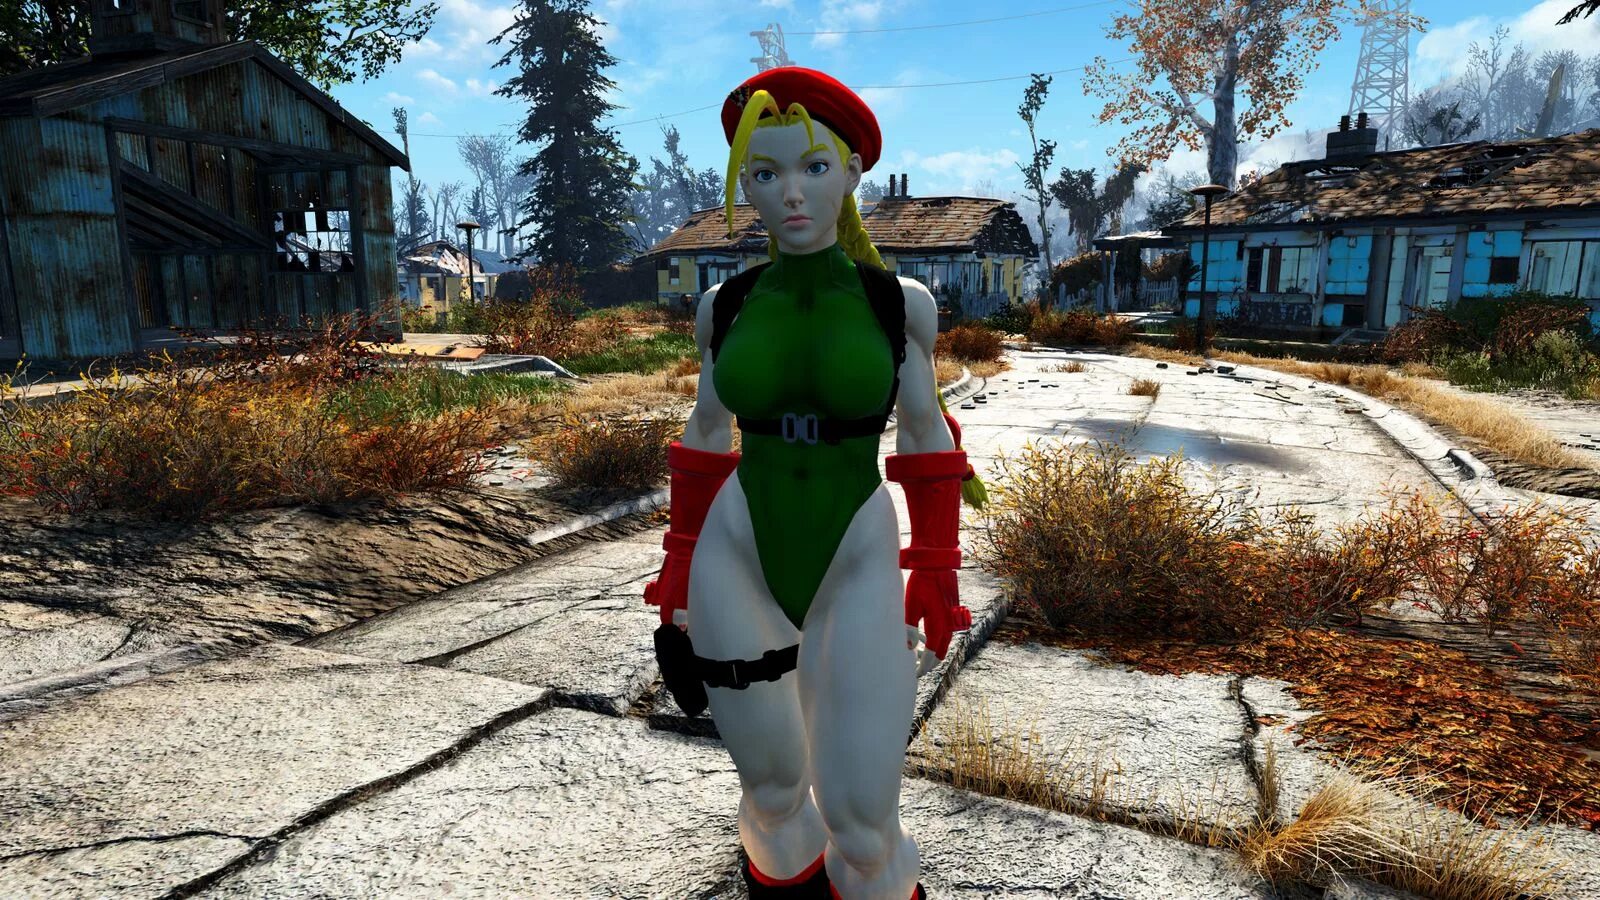 Https www fallout4 mods com. Кристен фоллаут 4. Fallout 4 пупсы. Fallout 4 Cammy Suit. Кукла Fallout 4.